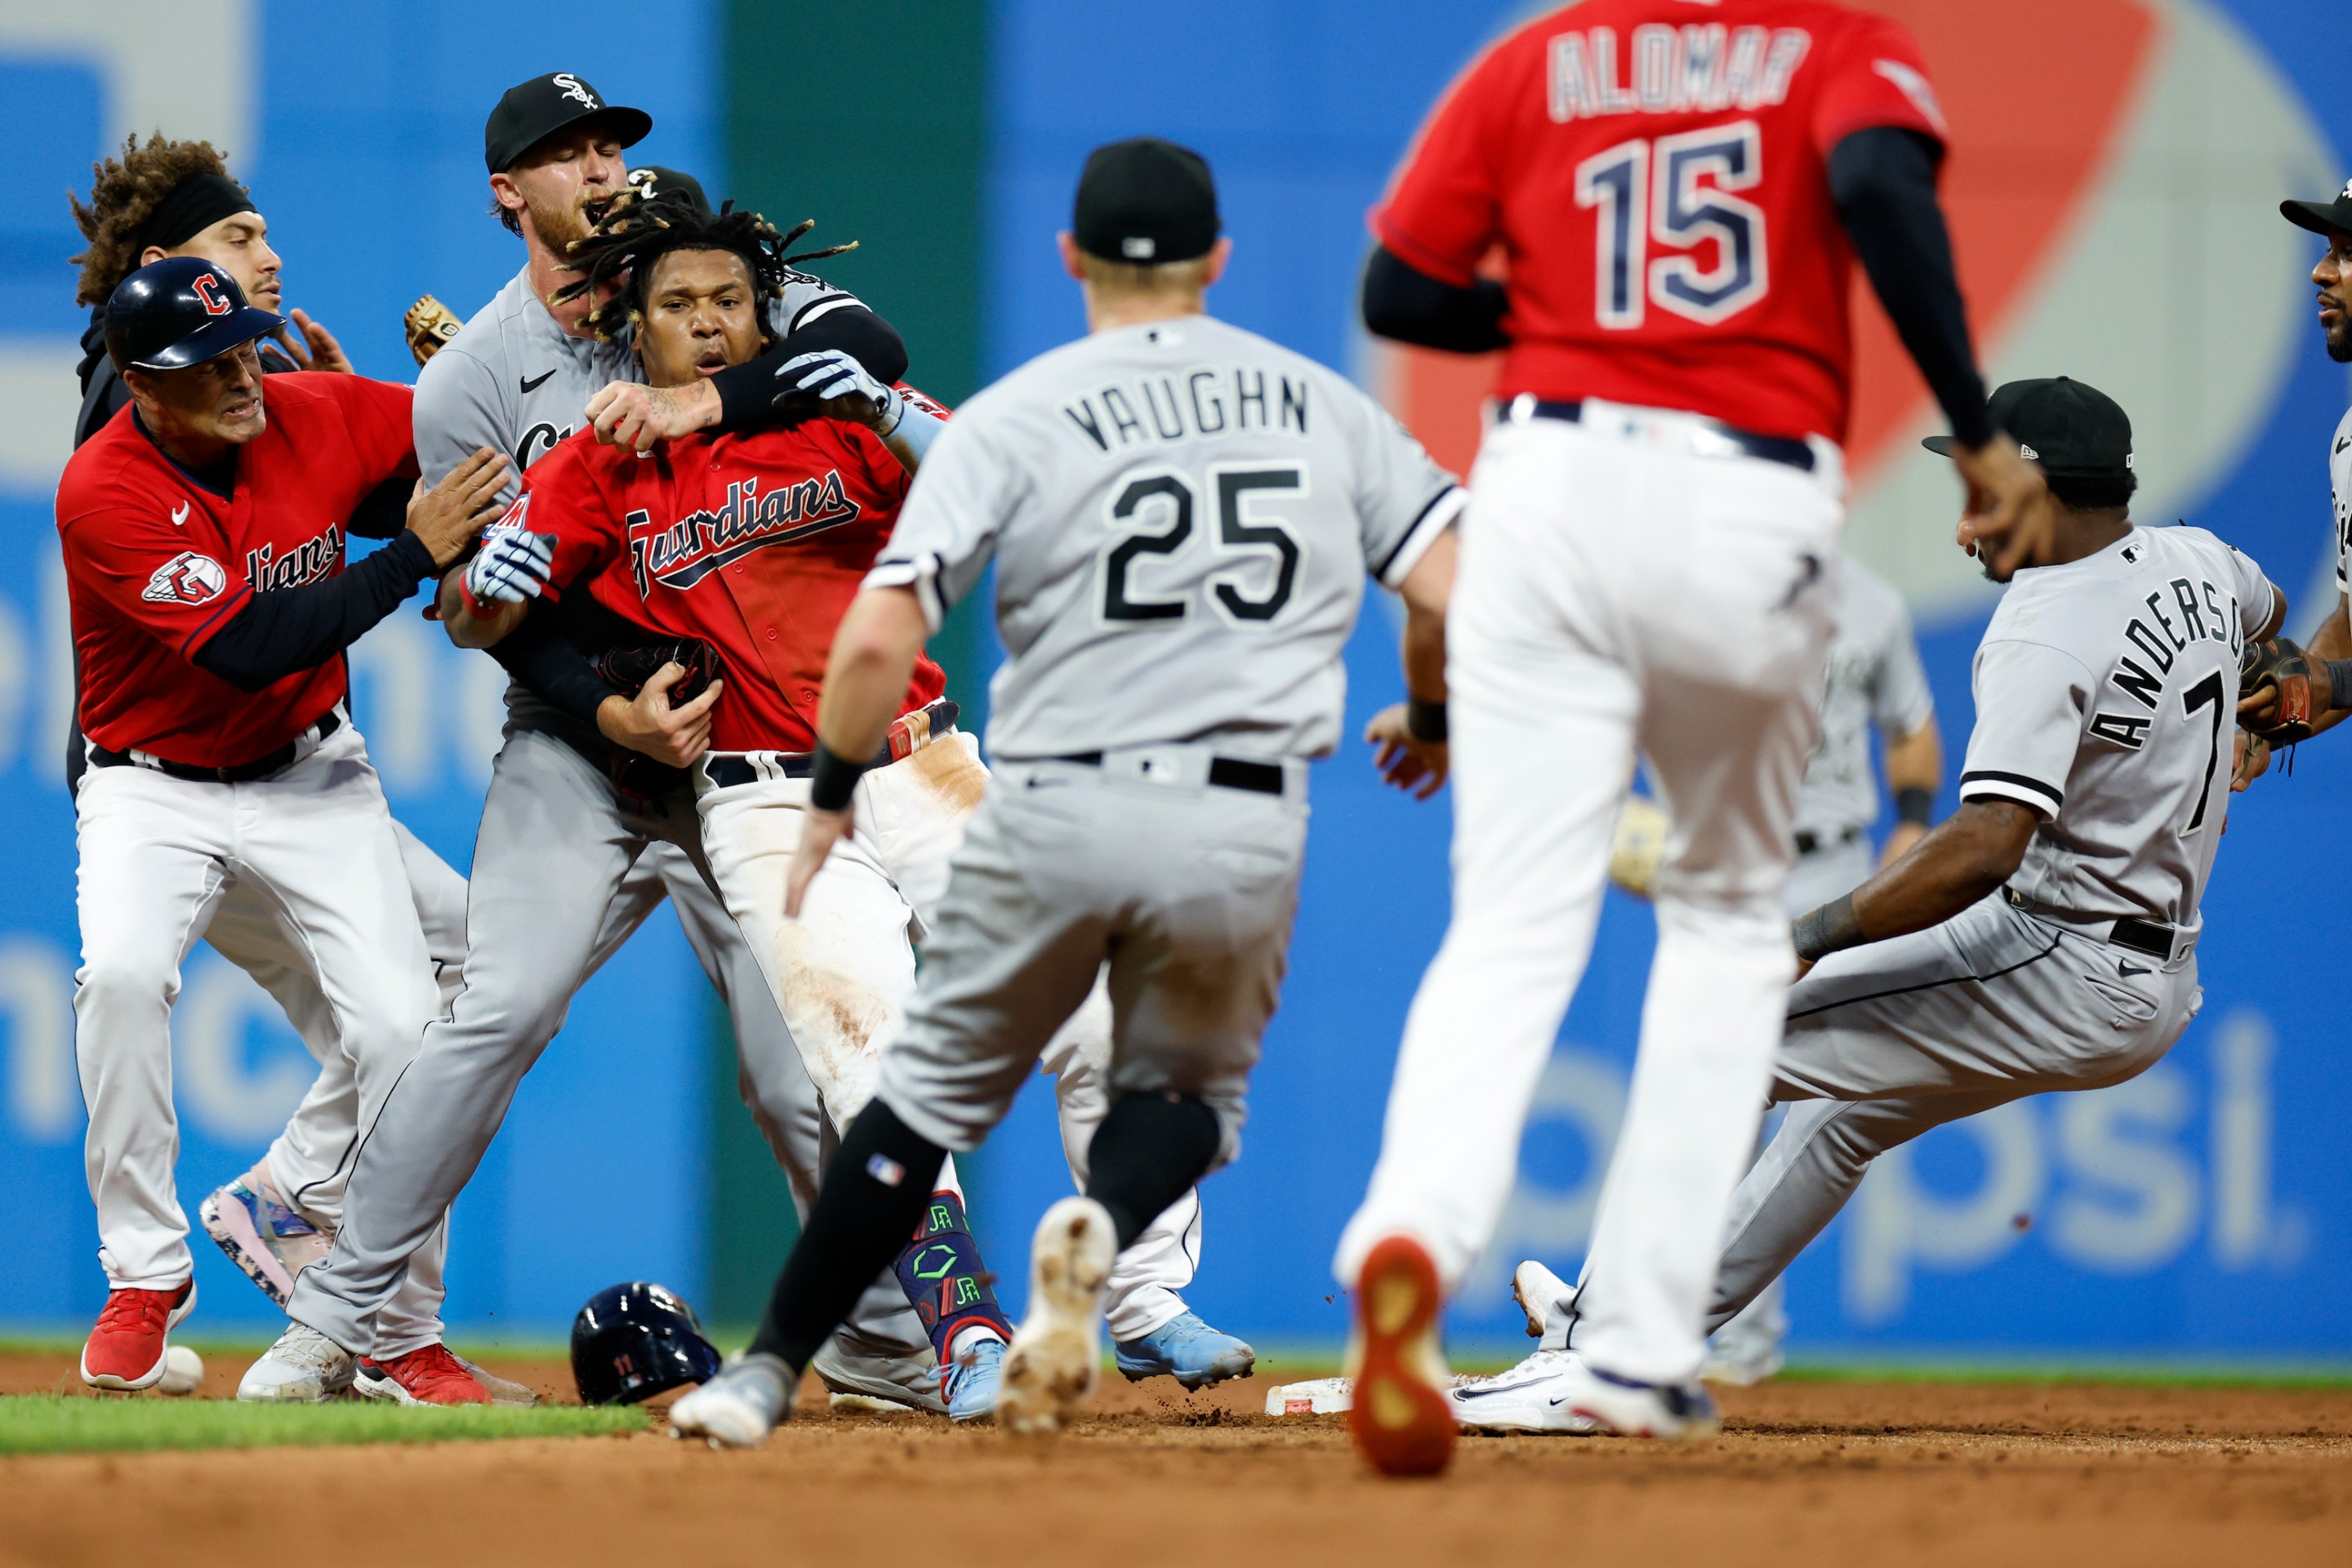 Jose Ramirez of the Cleveland Guardians is restrained by White Sox pitcher Michael Kopech after landing a heavy right hook to White Sox shortstop Tim Anderson's jaw during a game on August 5.